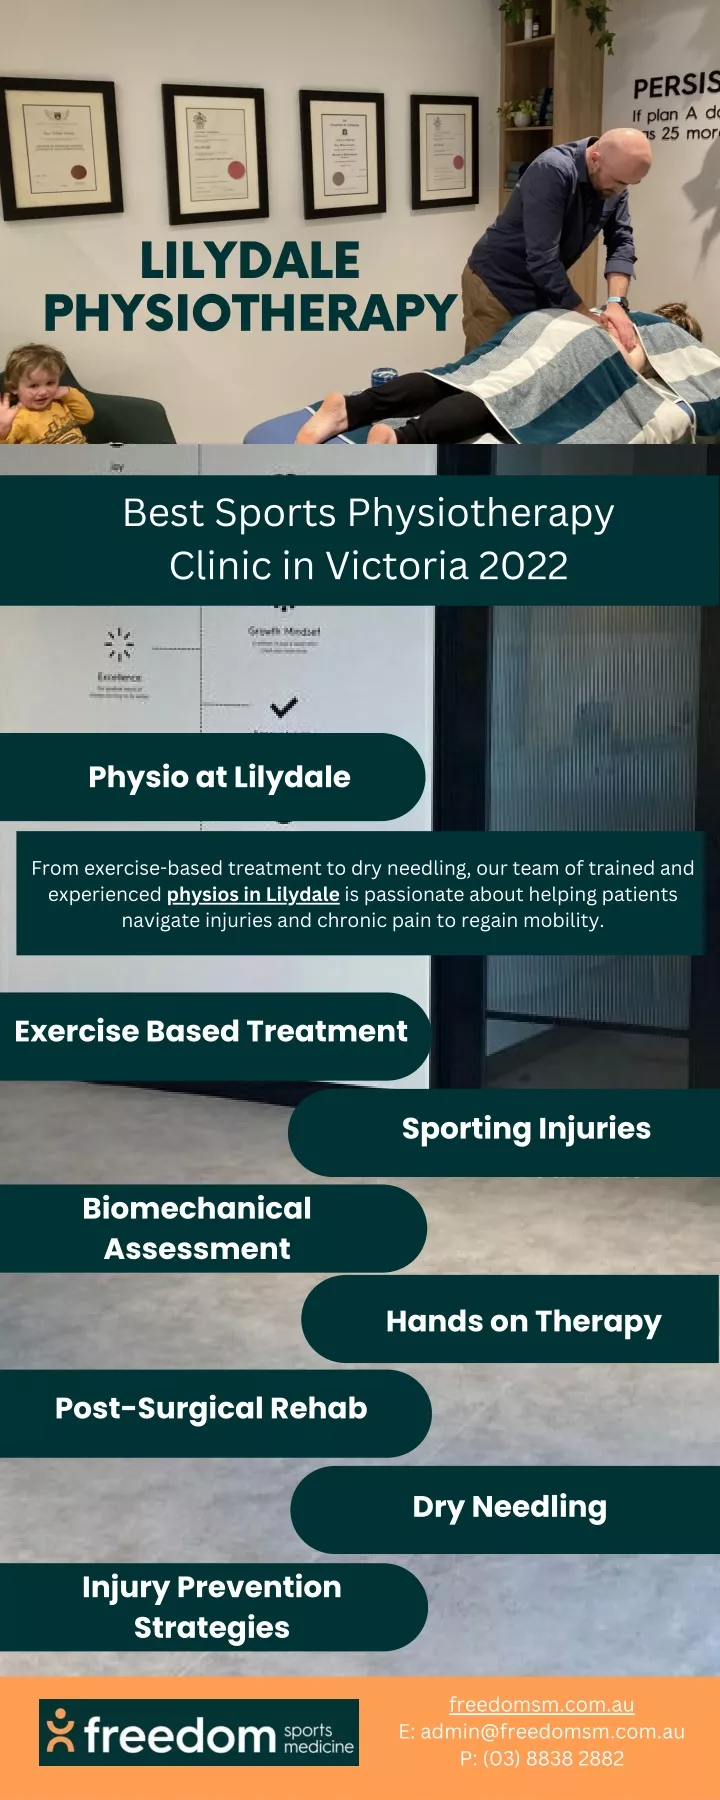 lilydale physiotherapy